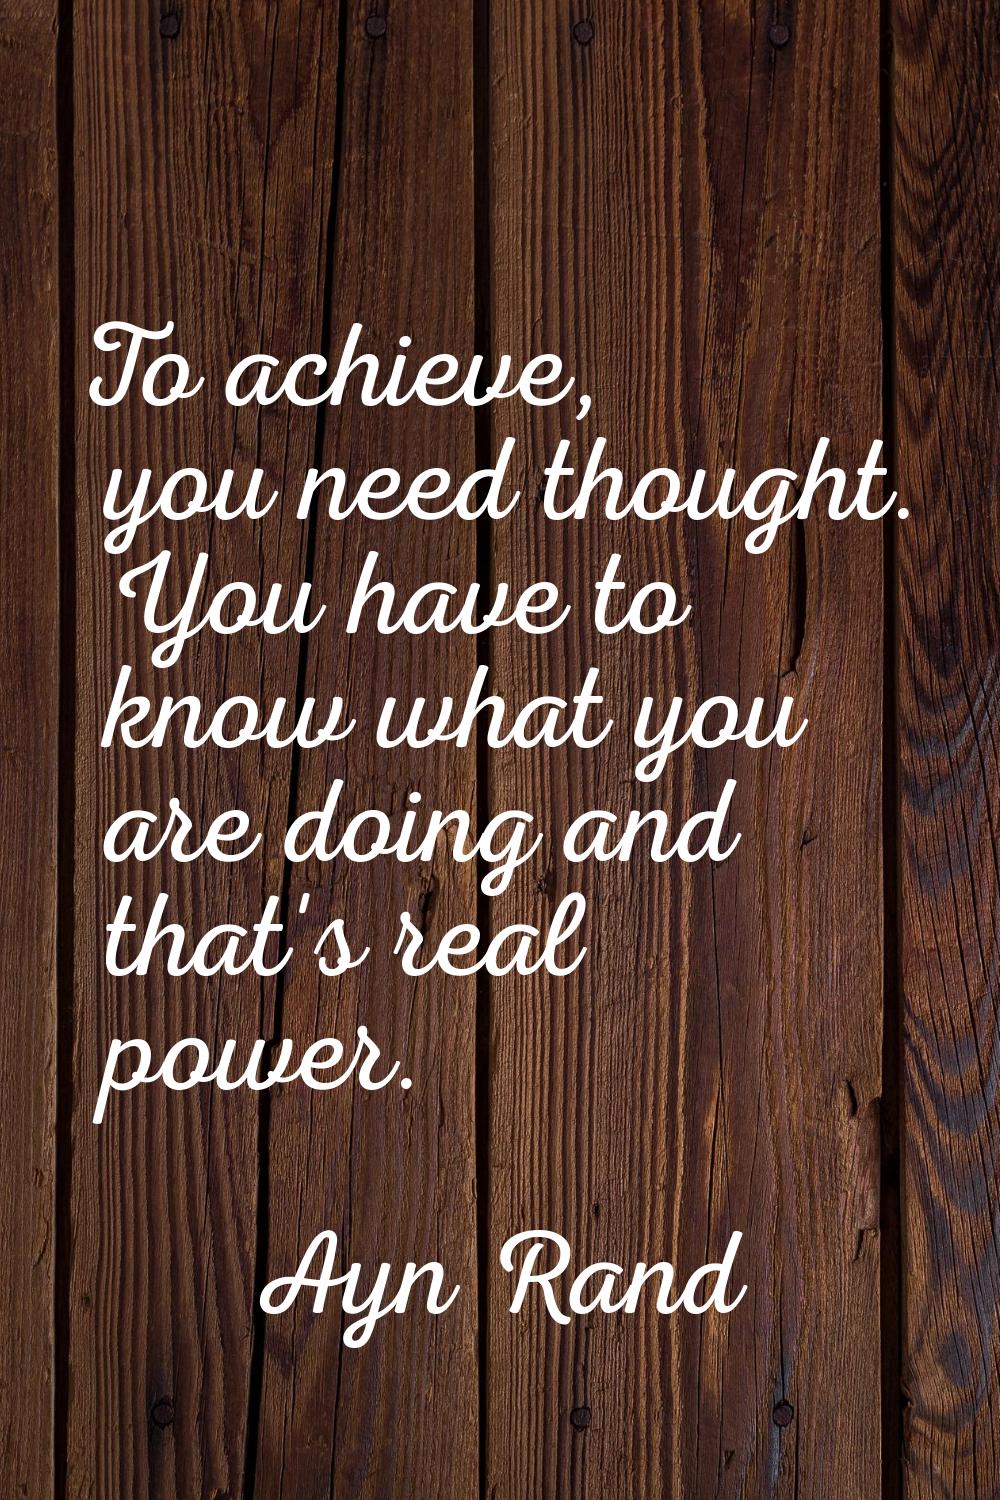 To achieve, you need thought. You have to know what you are doing and that's real power.